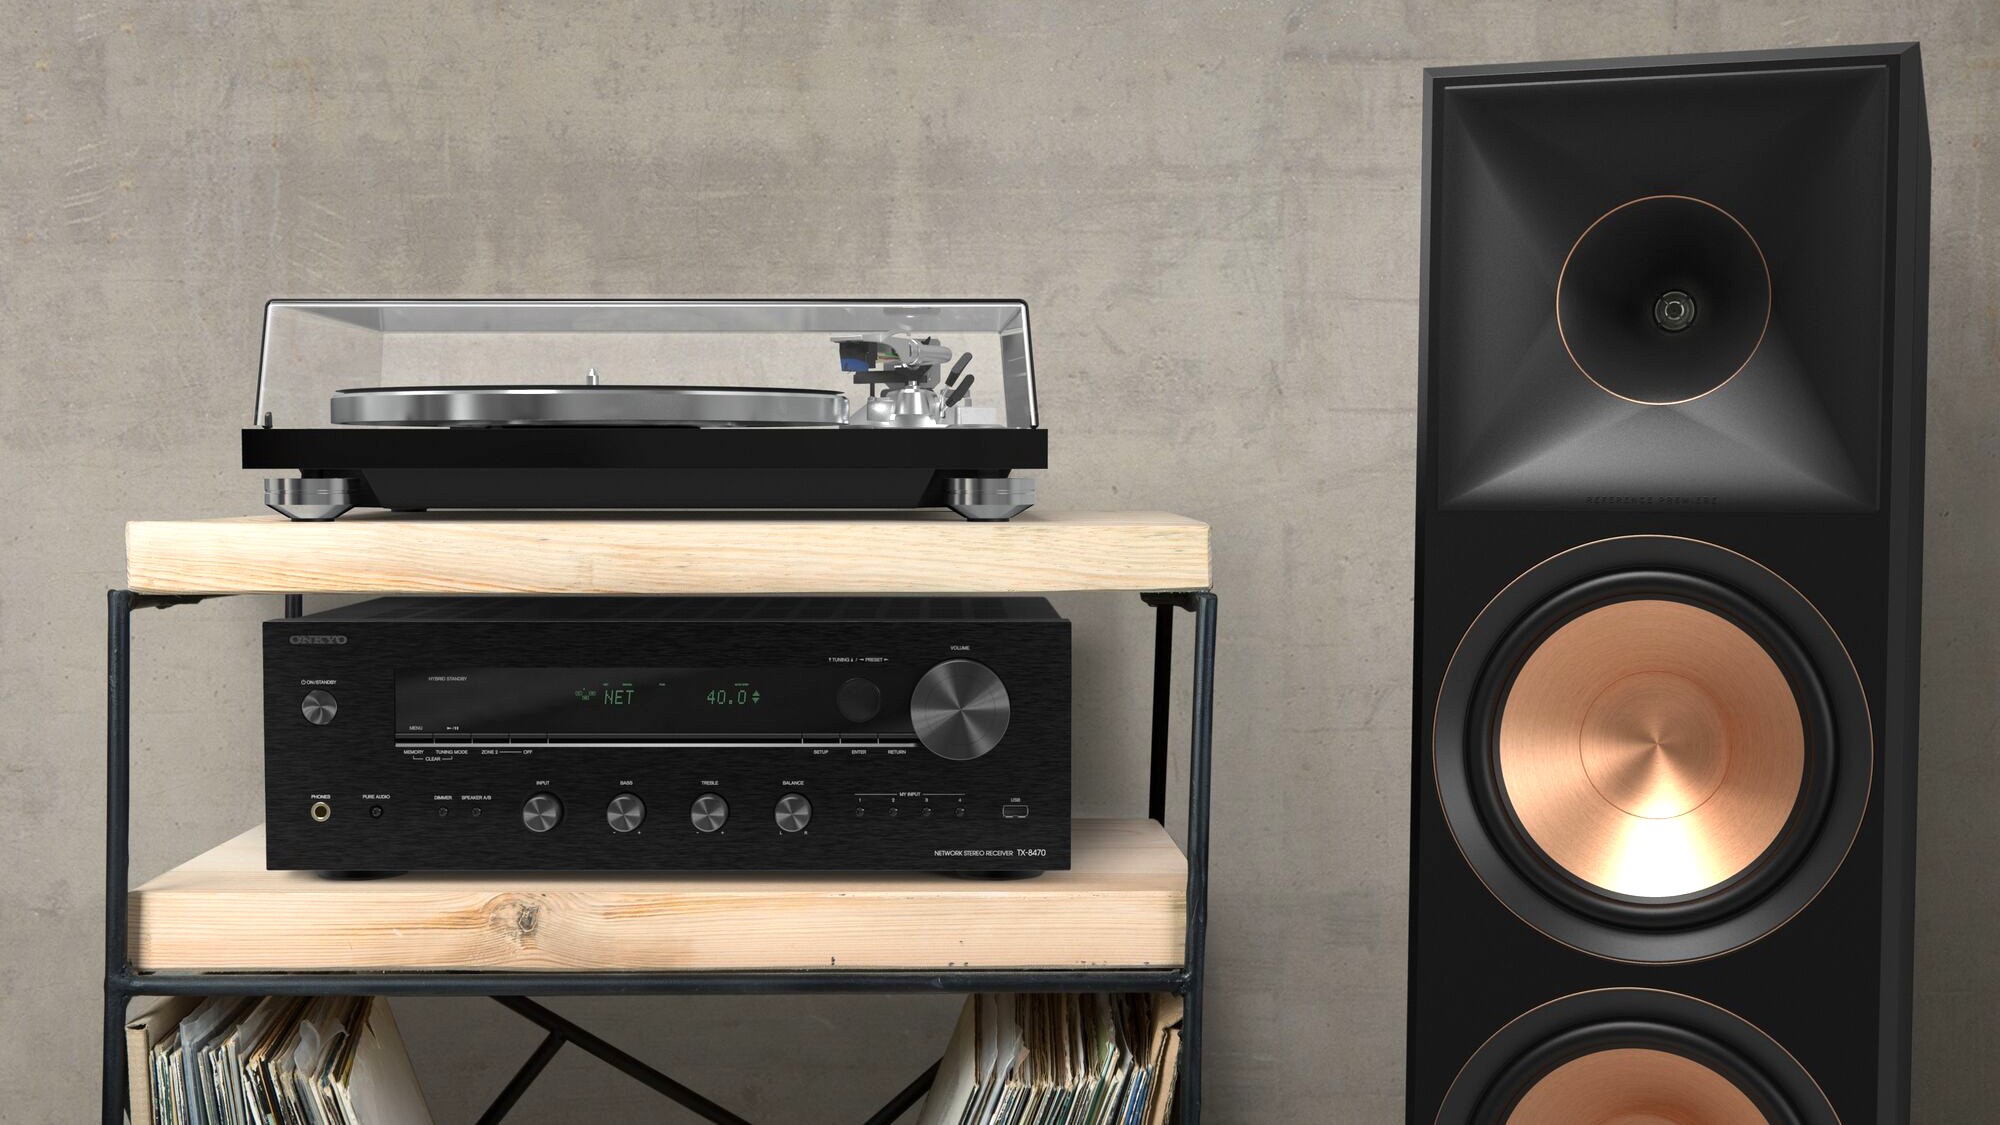 Onkyo TX-8470 lifestyle with turntable and Klipsch speakers